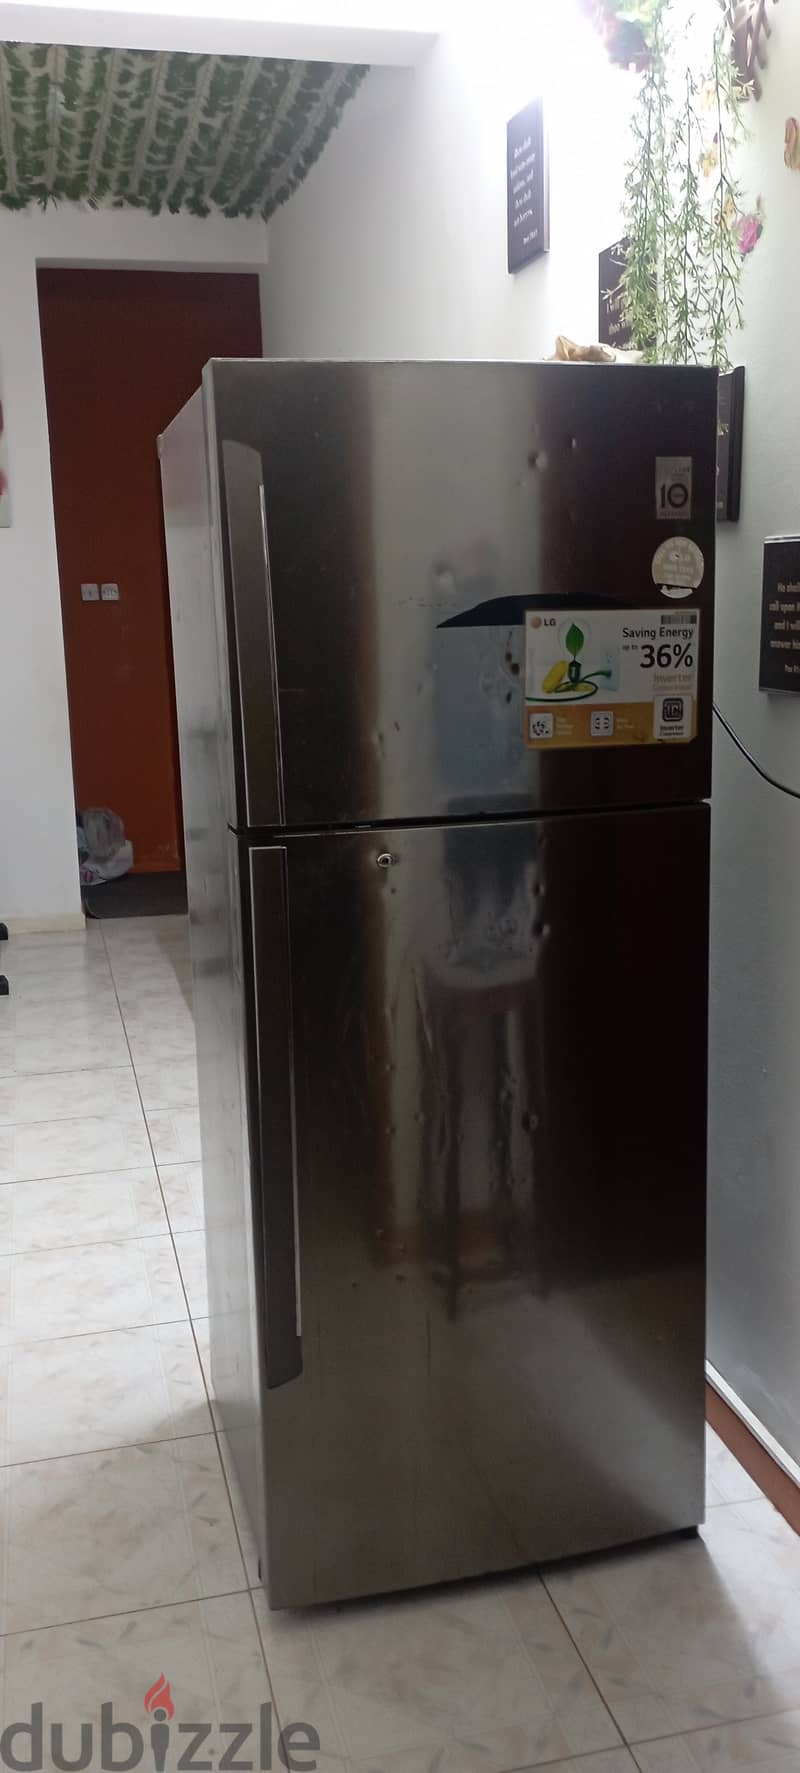 LG fridge 500 L for sale ( compressor not working, Other all is id co) 3